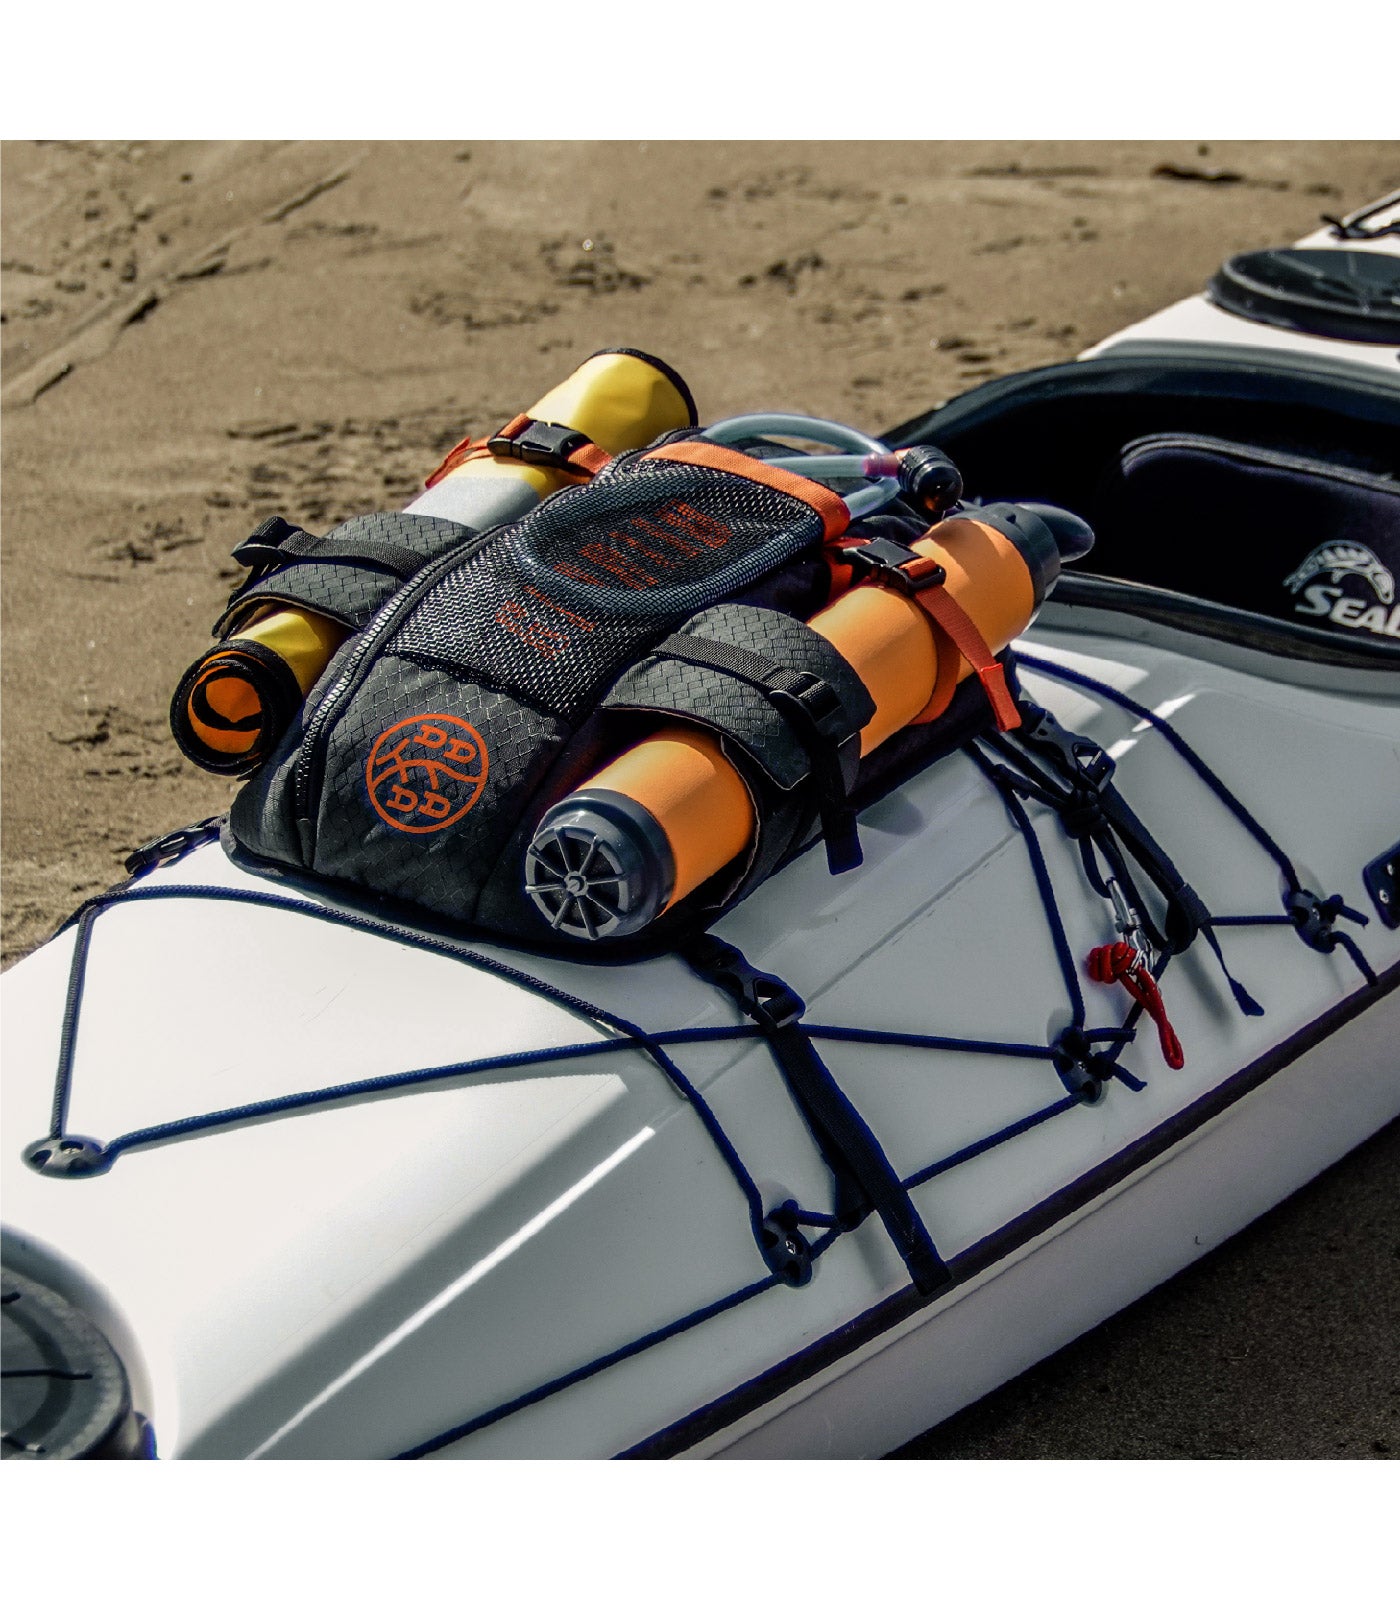 Gearlab Deck Pod - Kayak Deck Bag, Paddling Magazine Award (Holds Paddle Float, Bilge Pump), best kayak deck bag. Deck Pod carries hydration, snacks, gadgets, and safety equipment organized on deck and close to hand for your kayak trips.